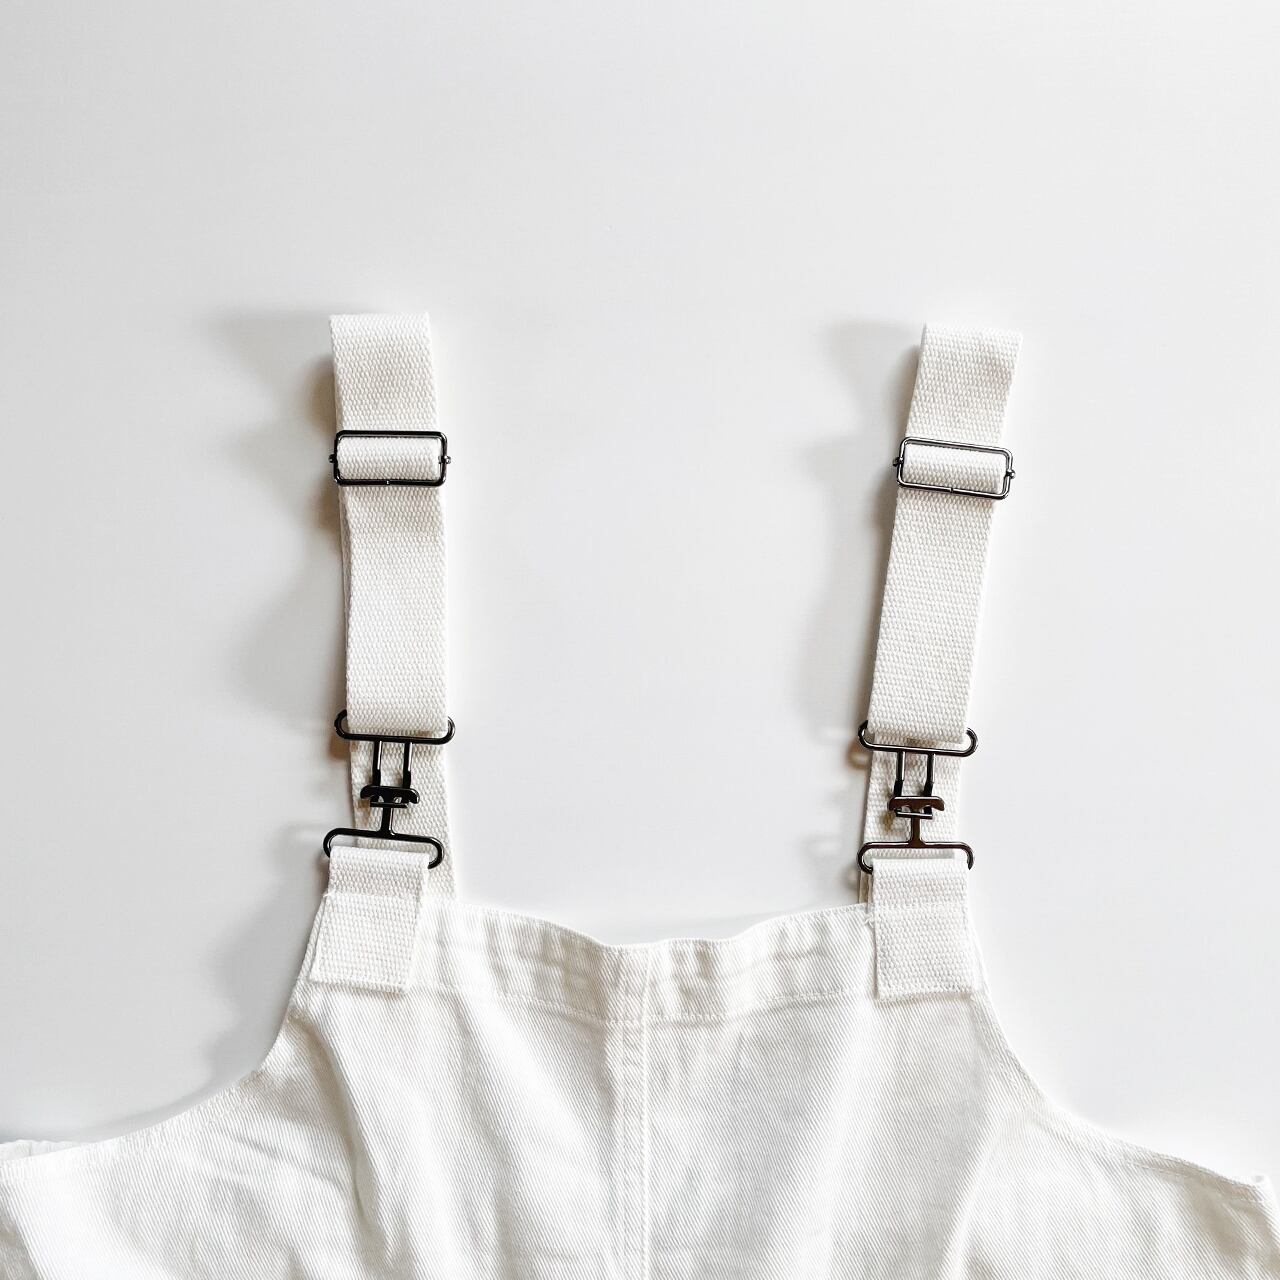 Switched pocket overalls (off-white)